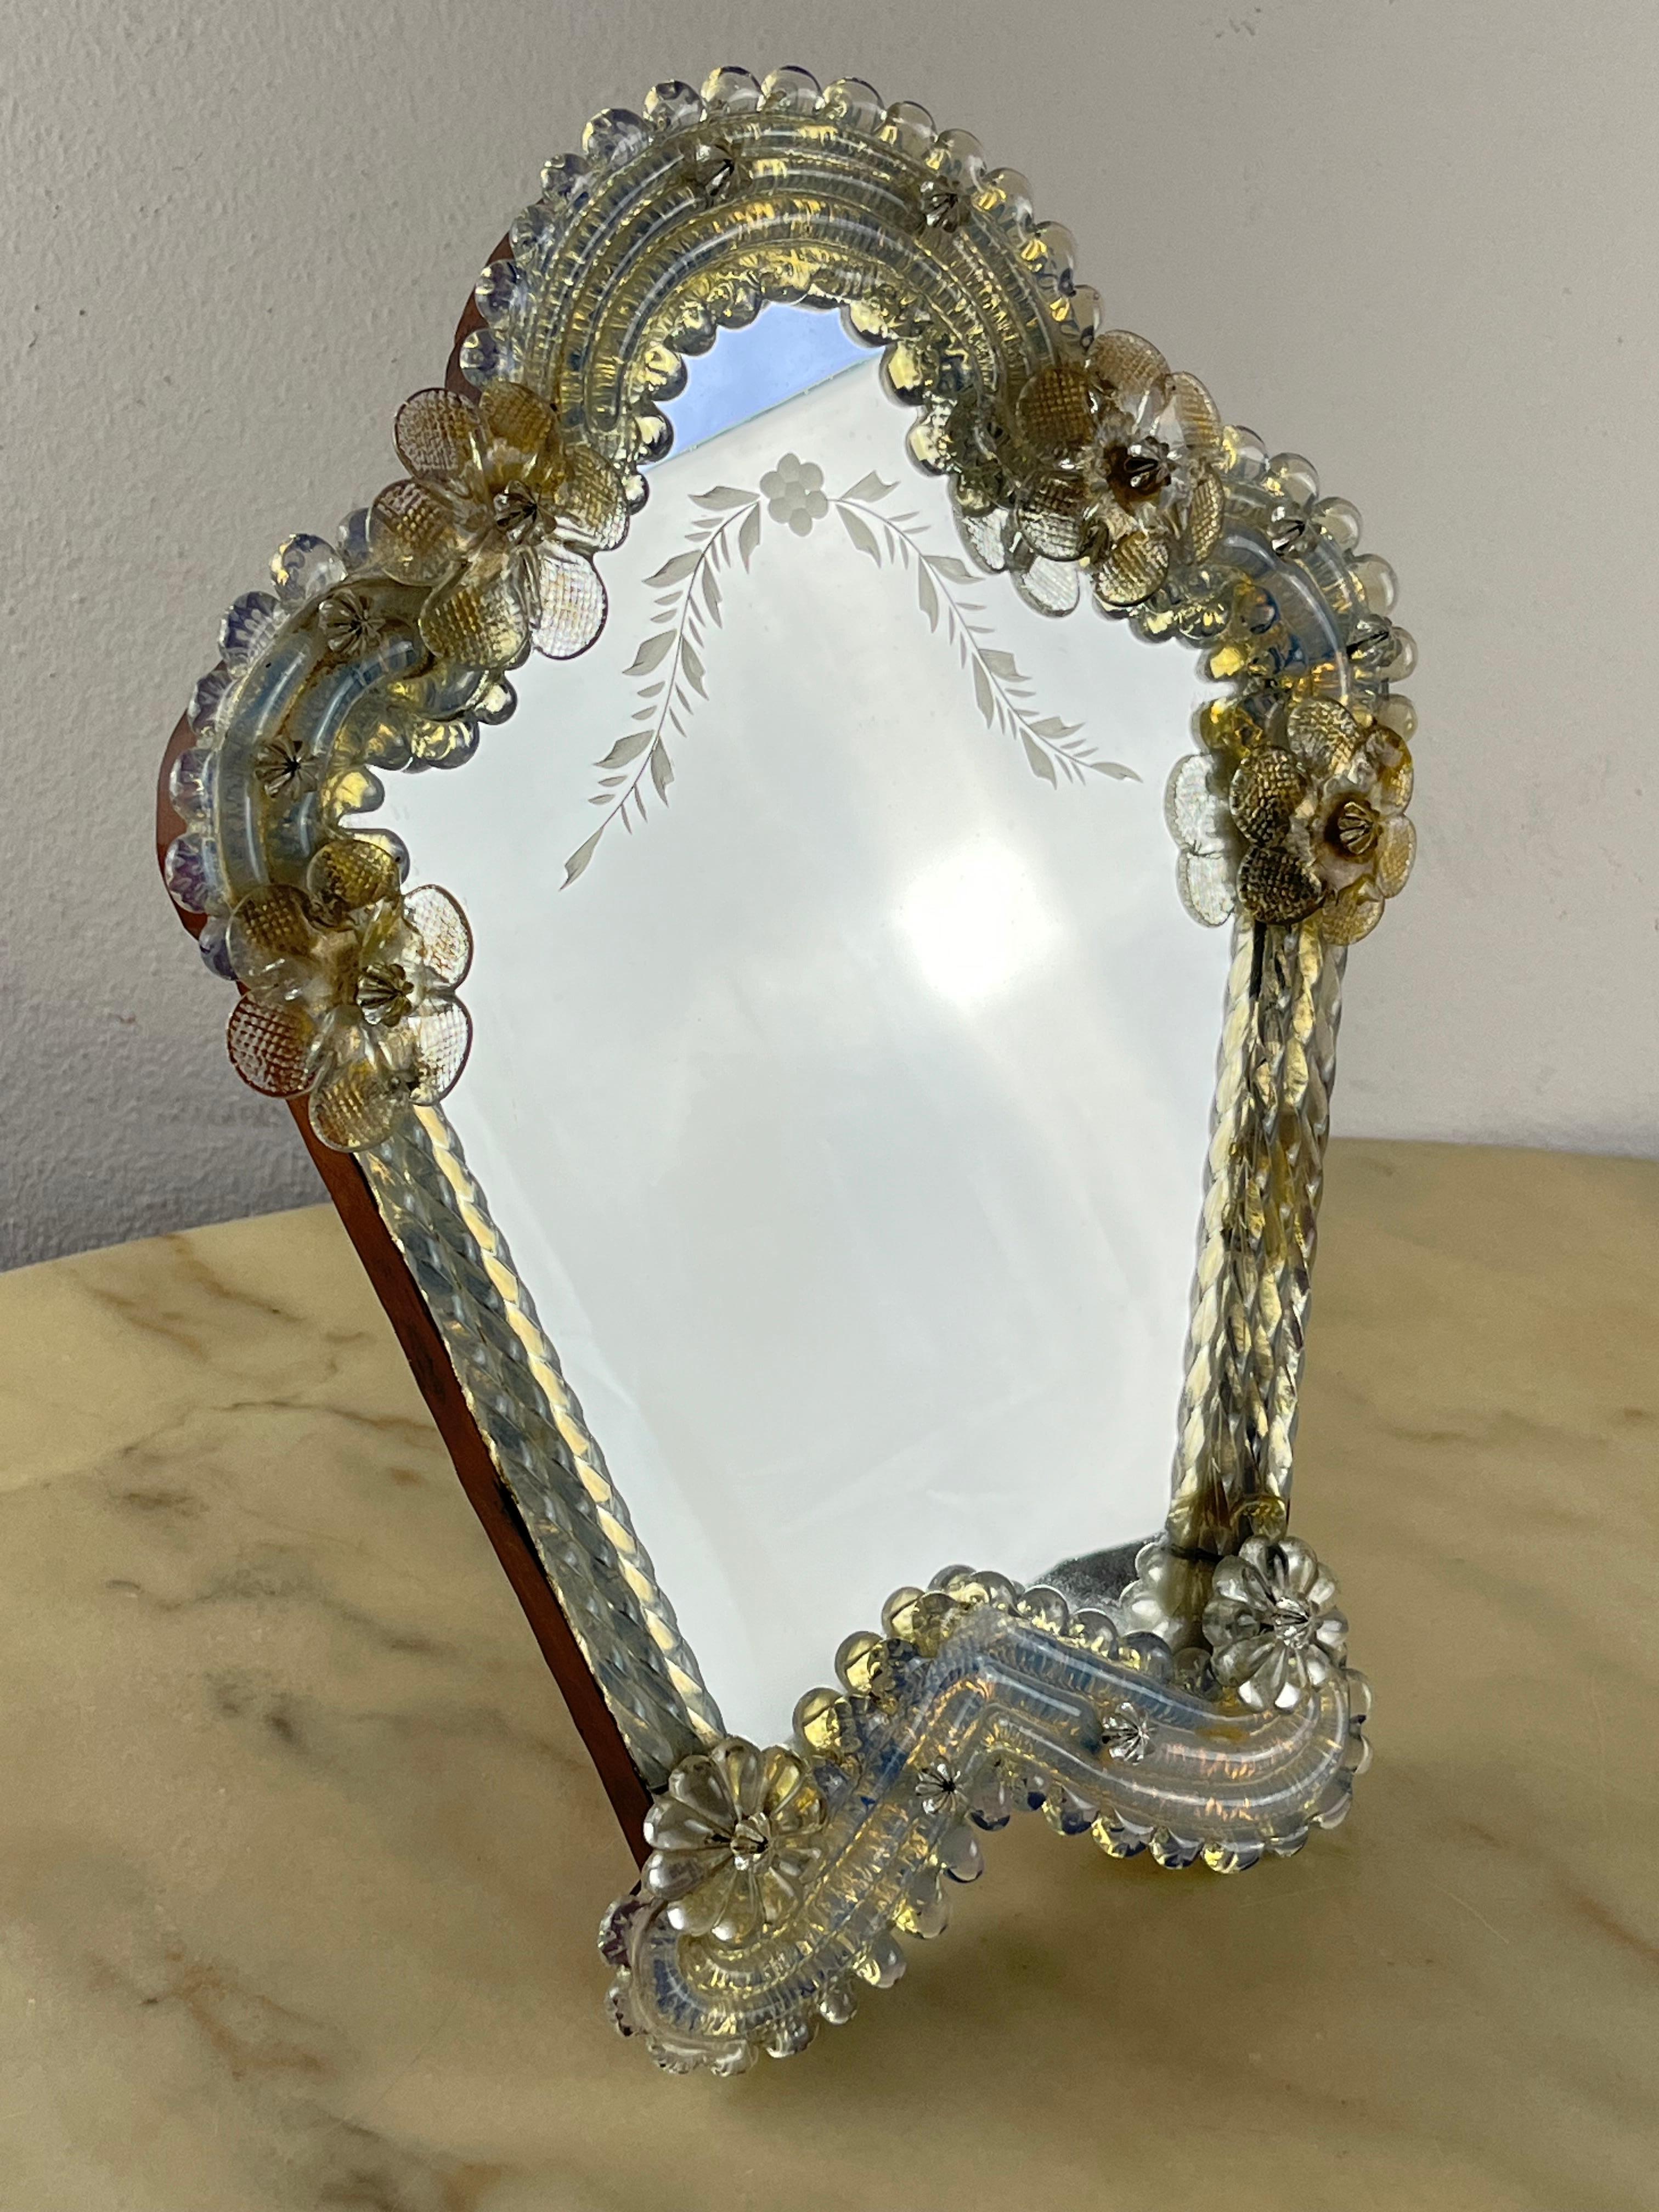 Mid-Century Venetian Murano glass table mirror, Italian design 1960s
It can also be used as a wall mirror. It has always belonged to my family.
Intact and in good condition, small signs of aging.